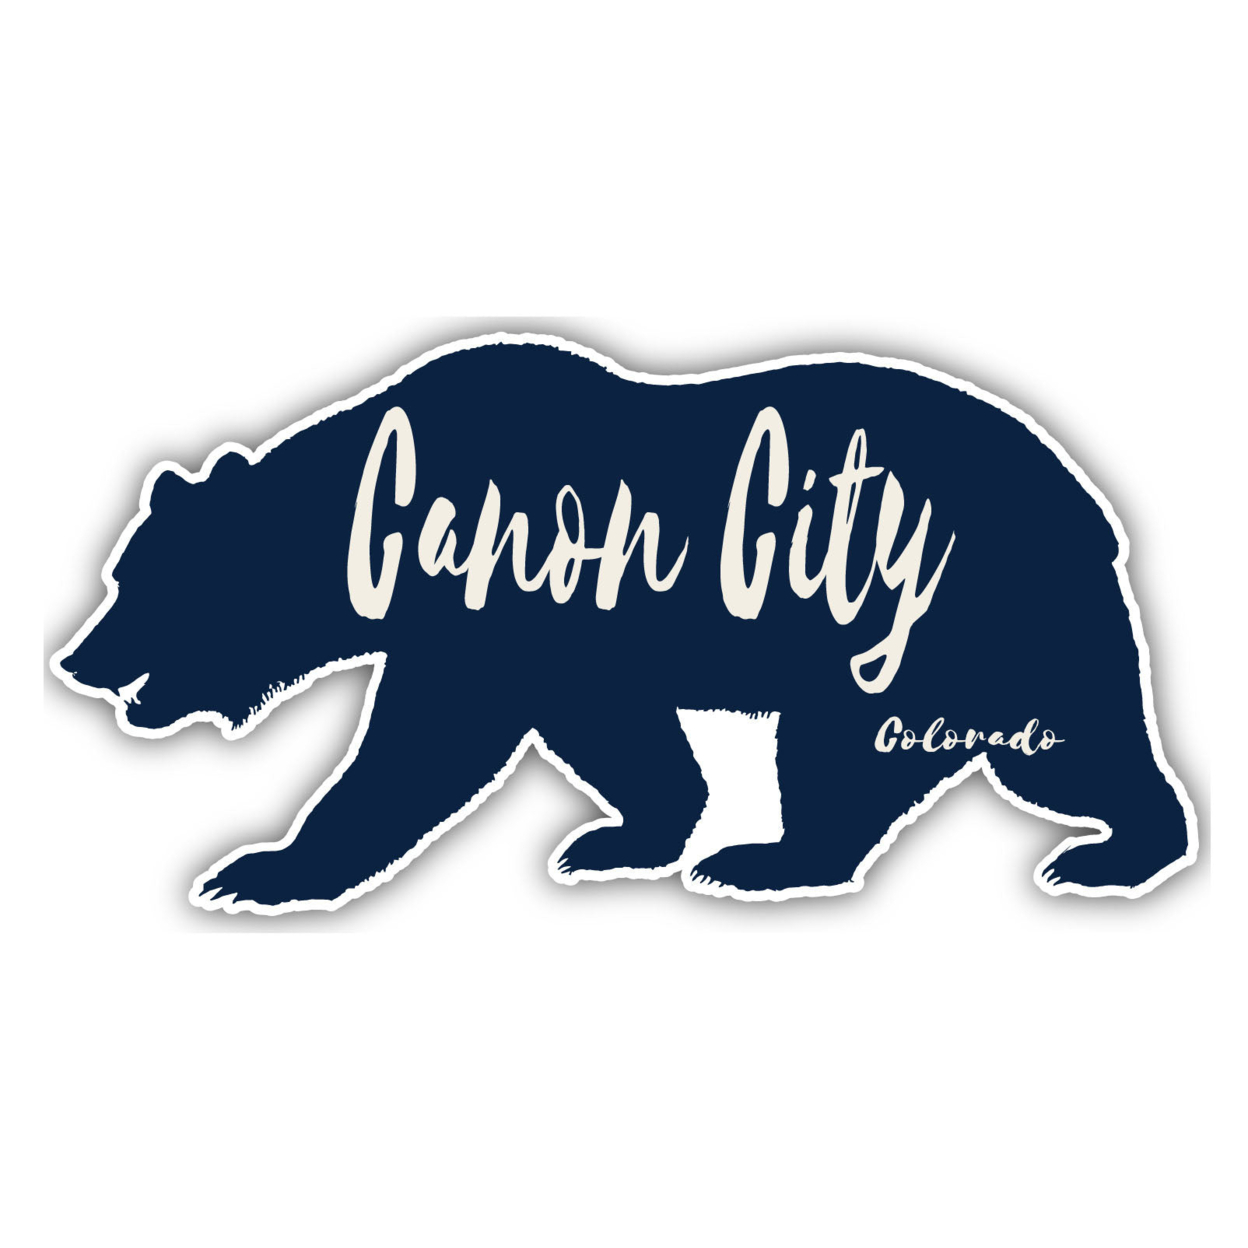 Canon City Colorado Souvenir Decorative Stickers (Choose Theme And Size) - 4-Pack, 6-Inch, Camp Life